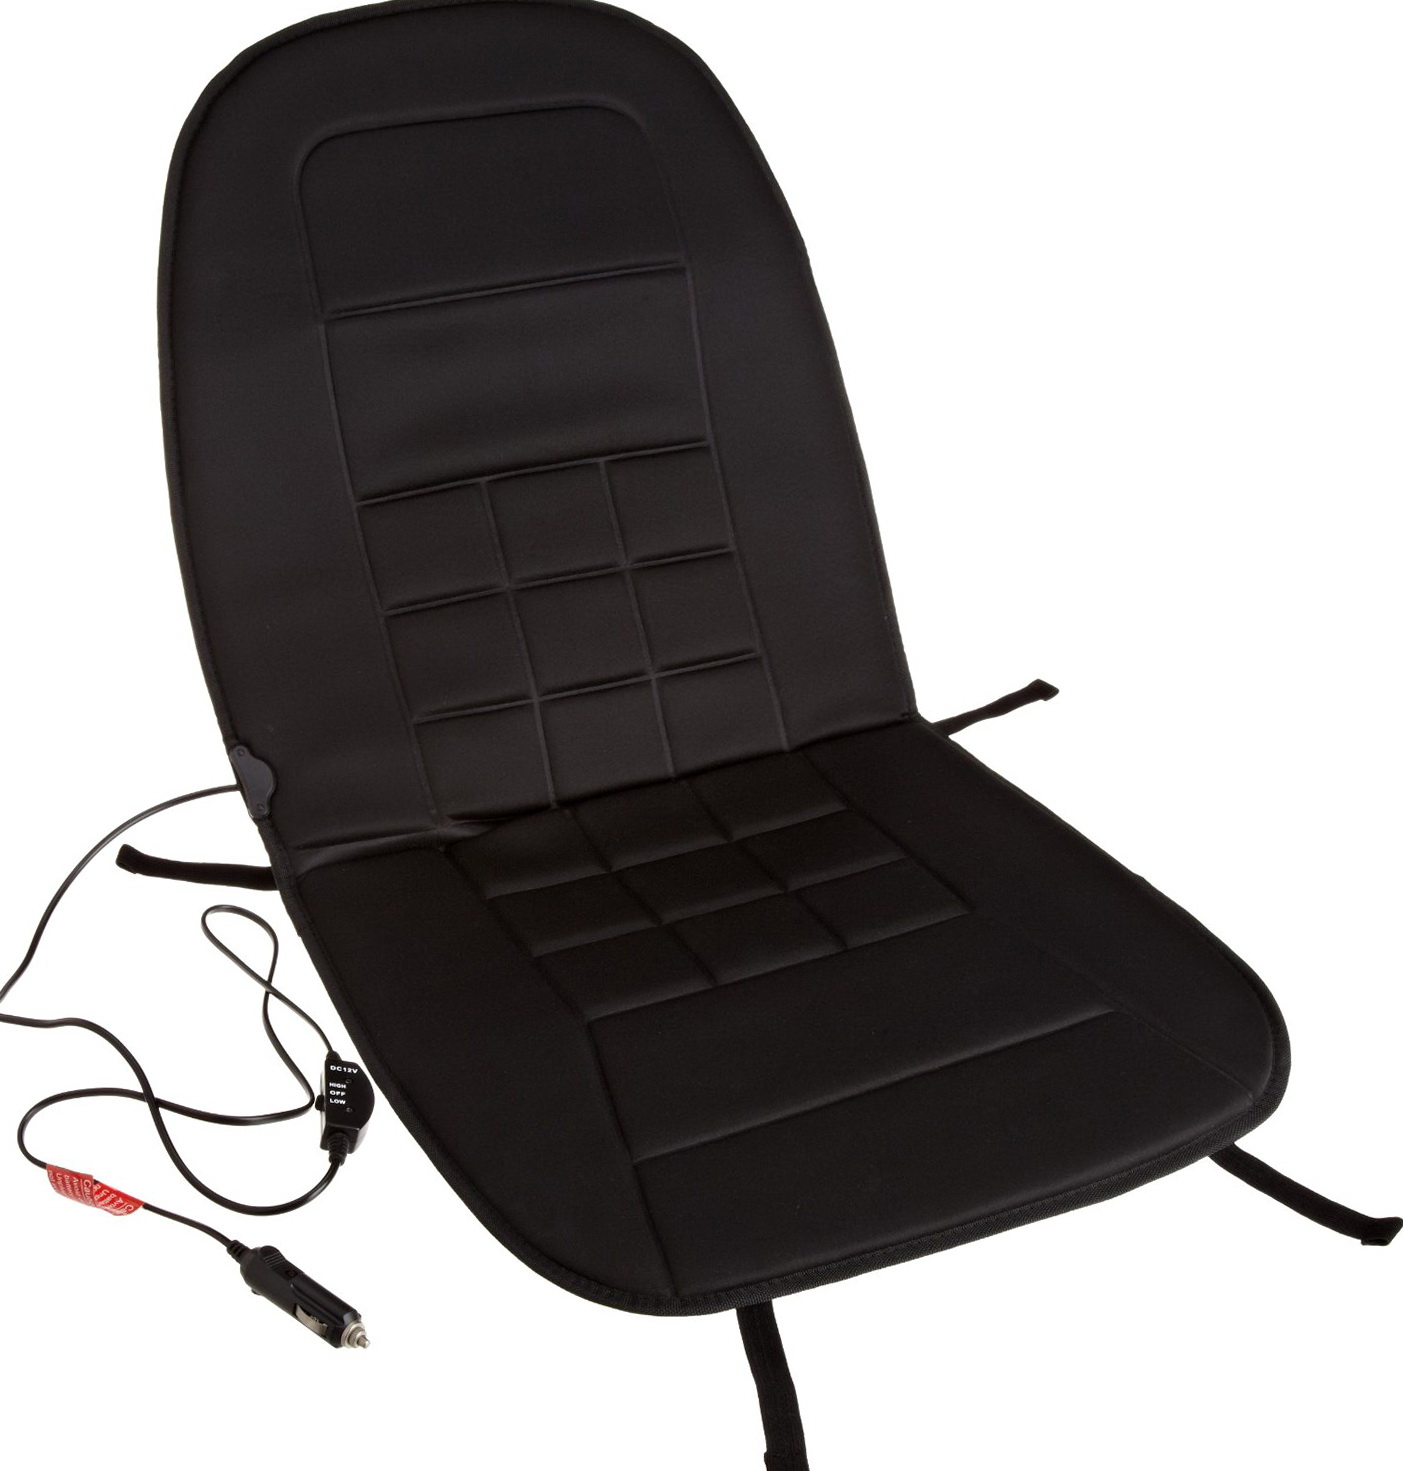 Heated Seat Cushions For Office Chairs Home Design Ideas